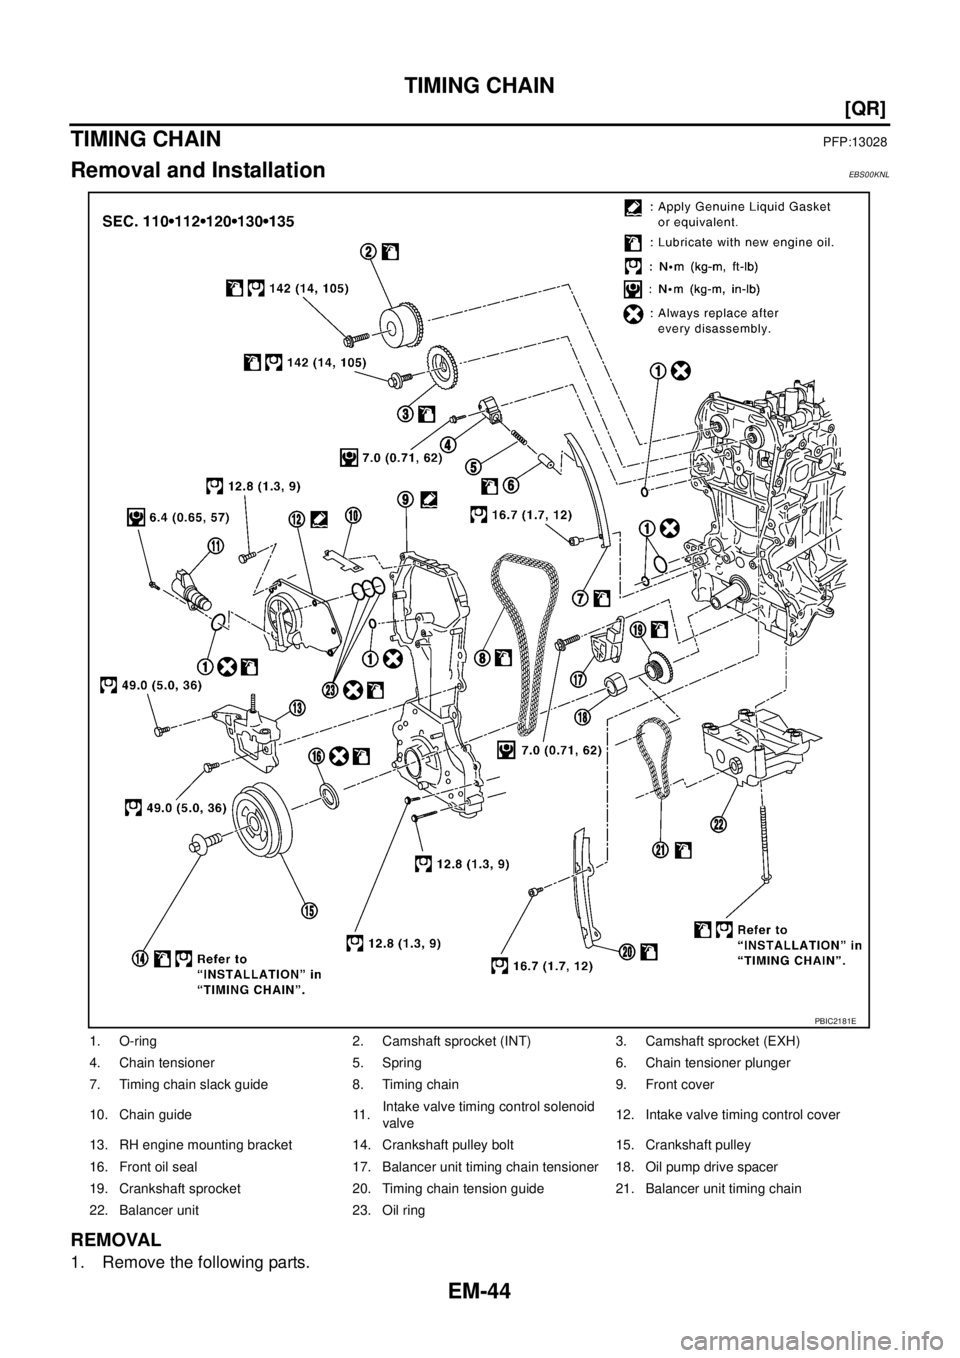 NISSAN X-TRAIL 2003  Service Repair Manual EM-44
[QR]
TIMING CHAIN
 
TIMING CHAINPFP:13028
Removal and InstallationEBS00KNL
REMOVAL
1. Remove the following parts.
1. O-ring 2. Camshaft sprocket (INT) 3. Camshaft sprocket (EXH)
4. Chain tension